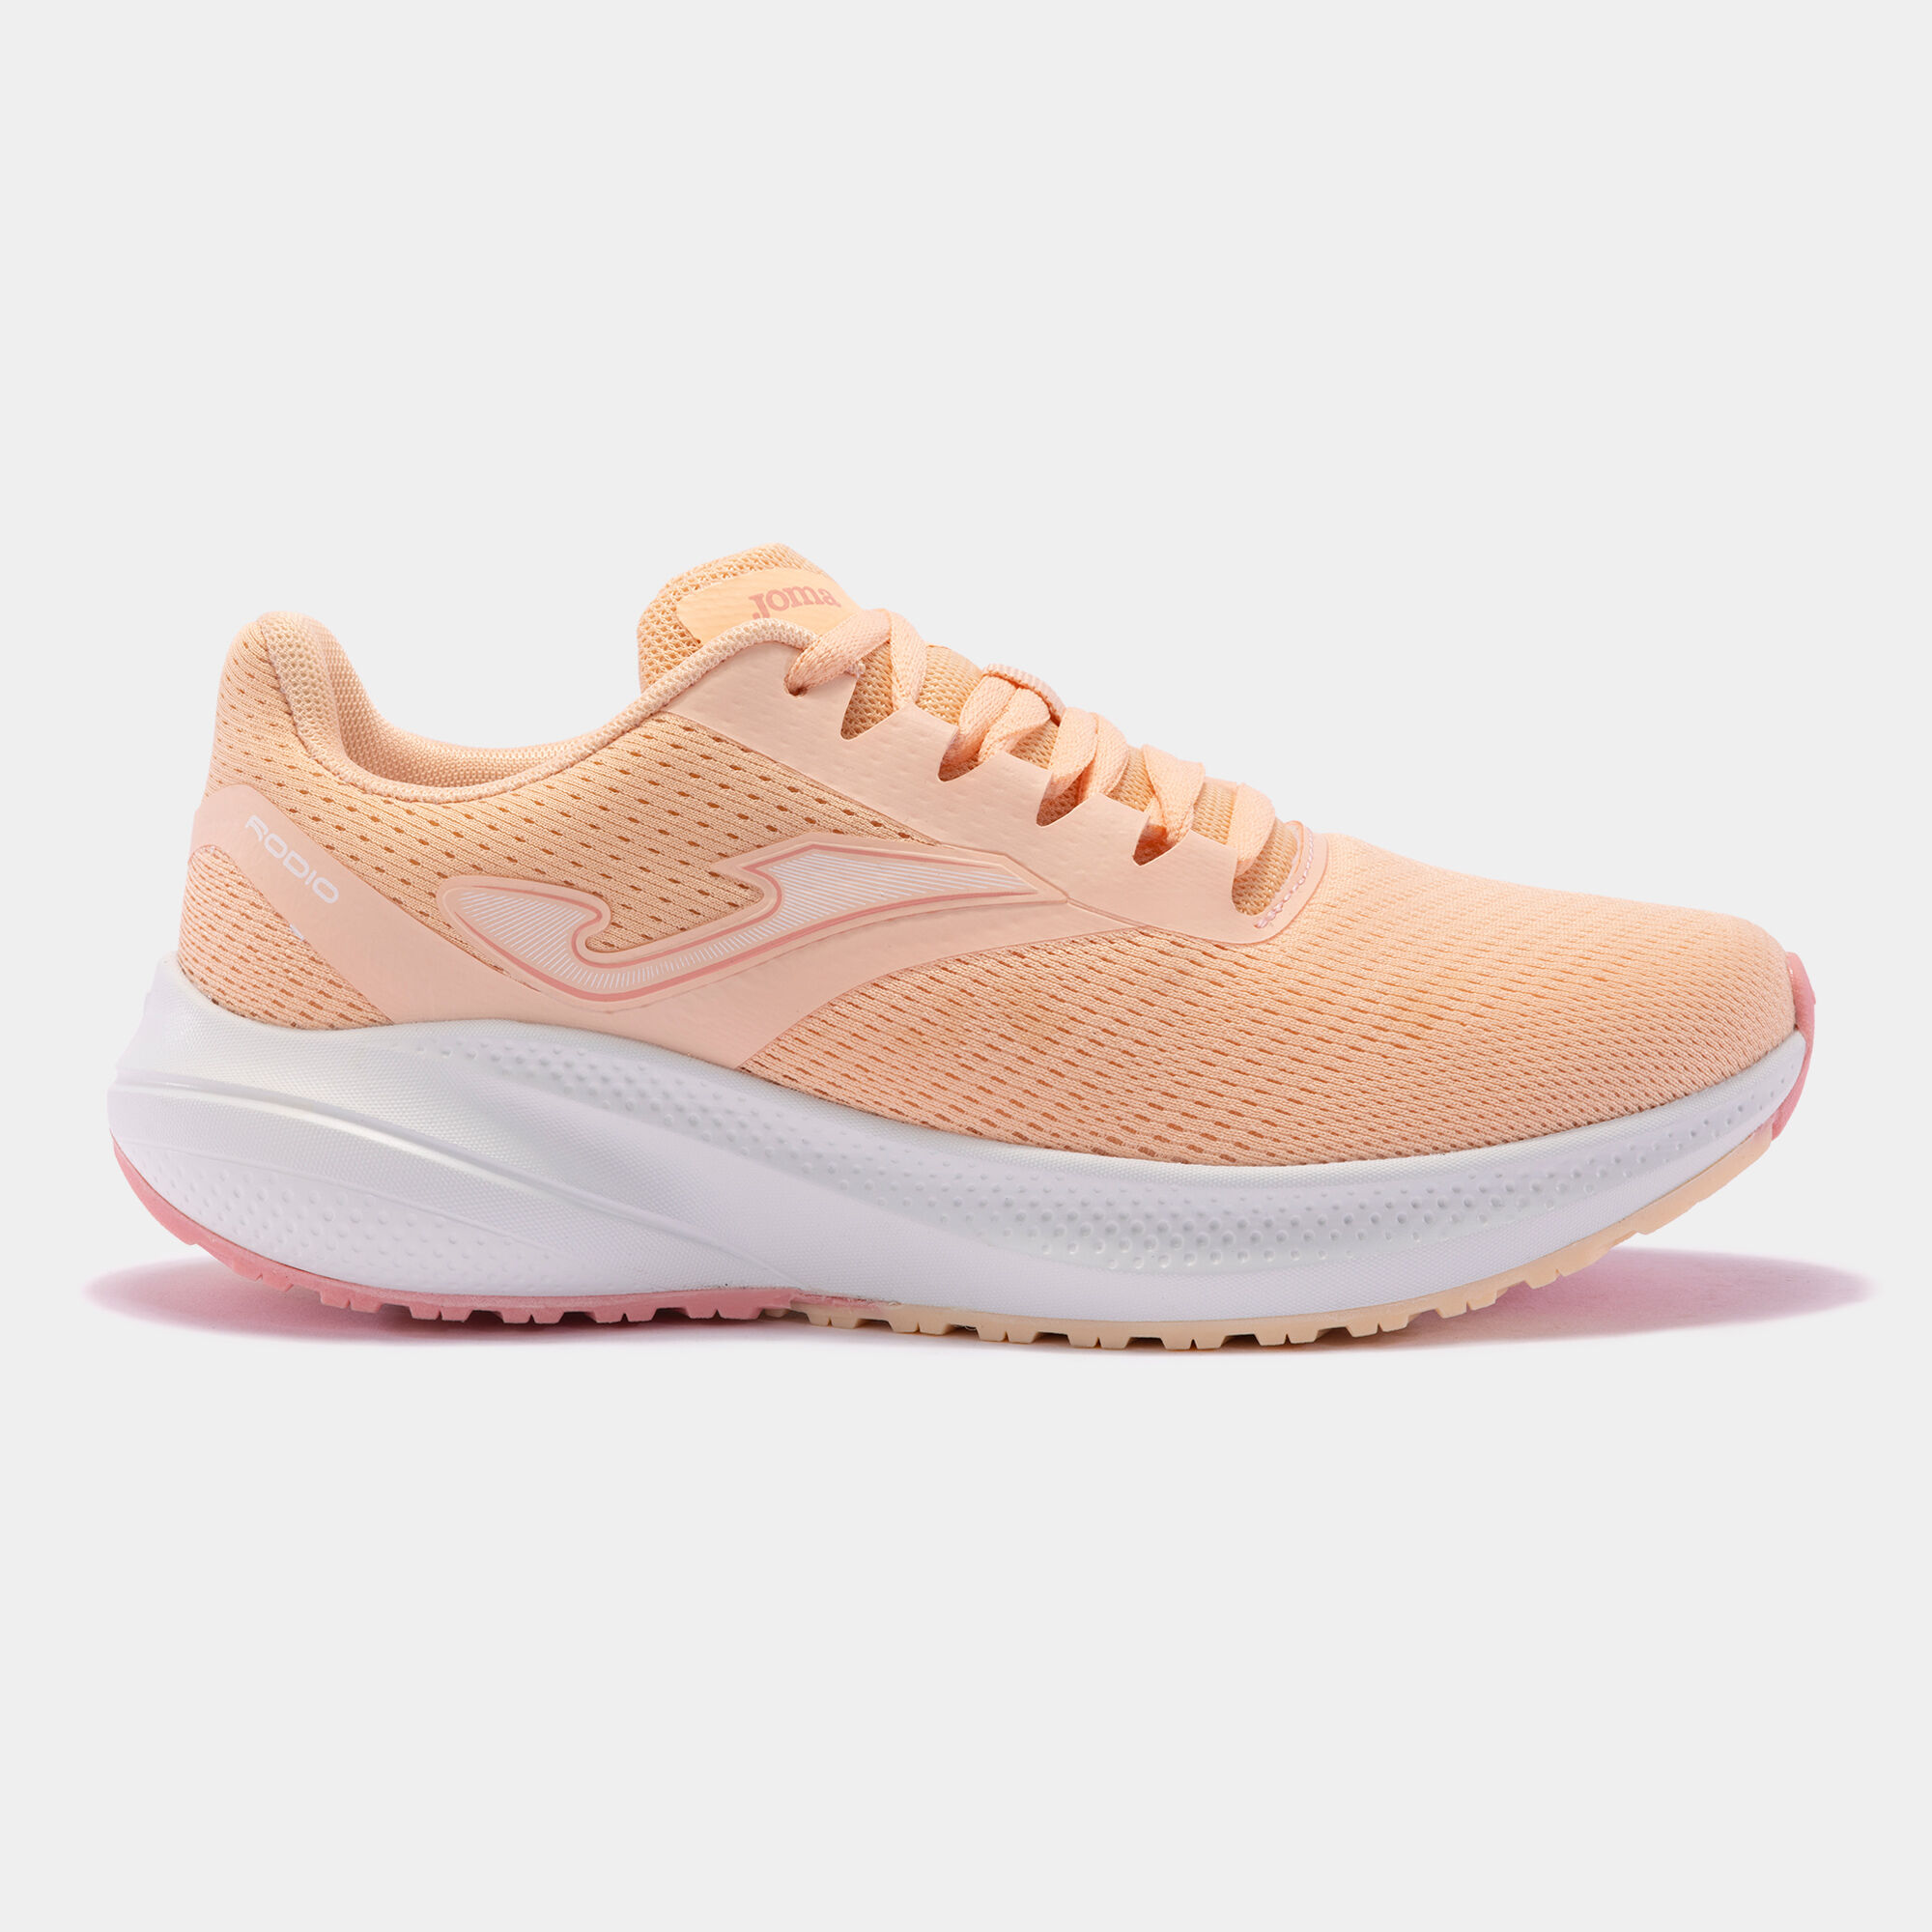 Running shoes Rodio Lady 24 woman pink